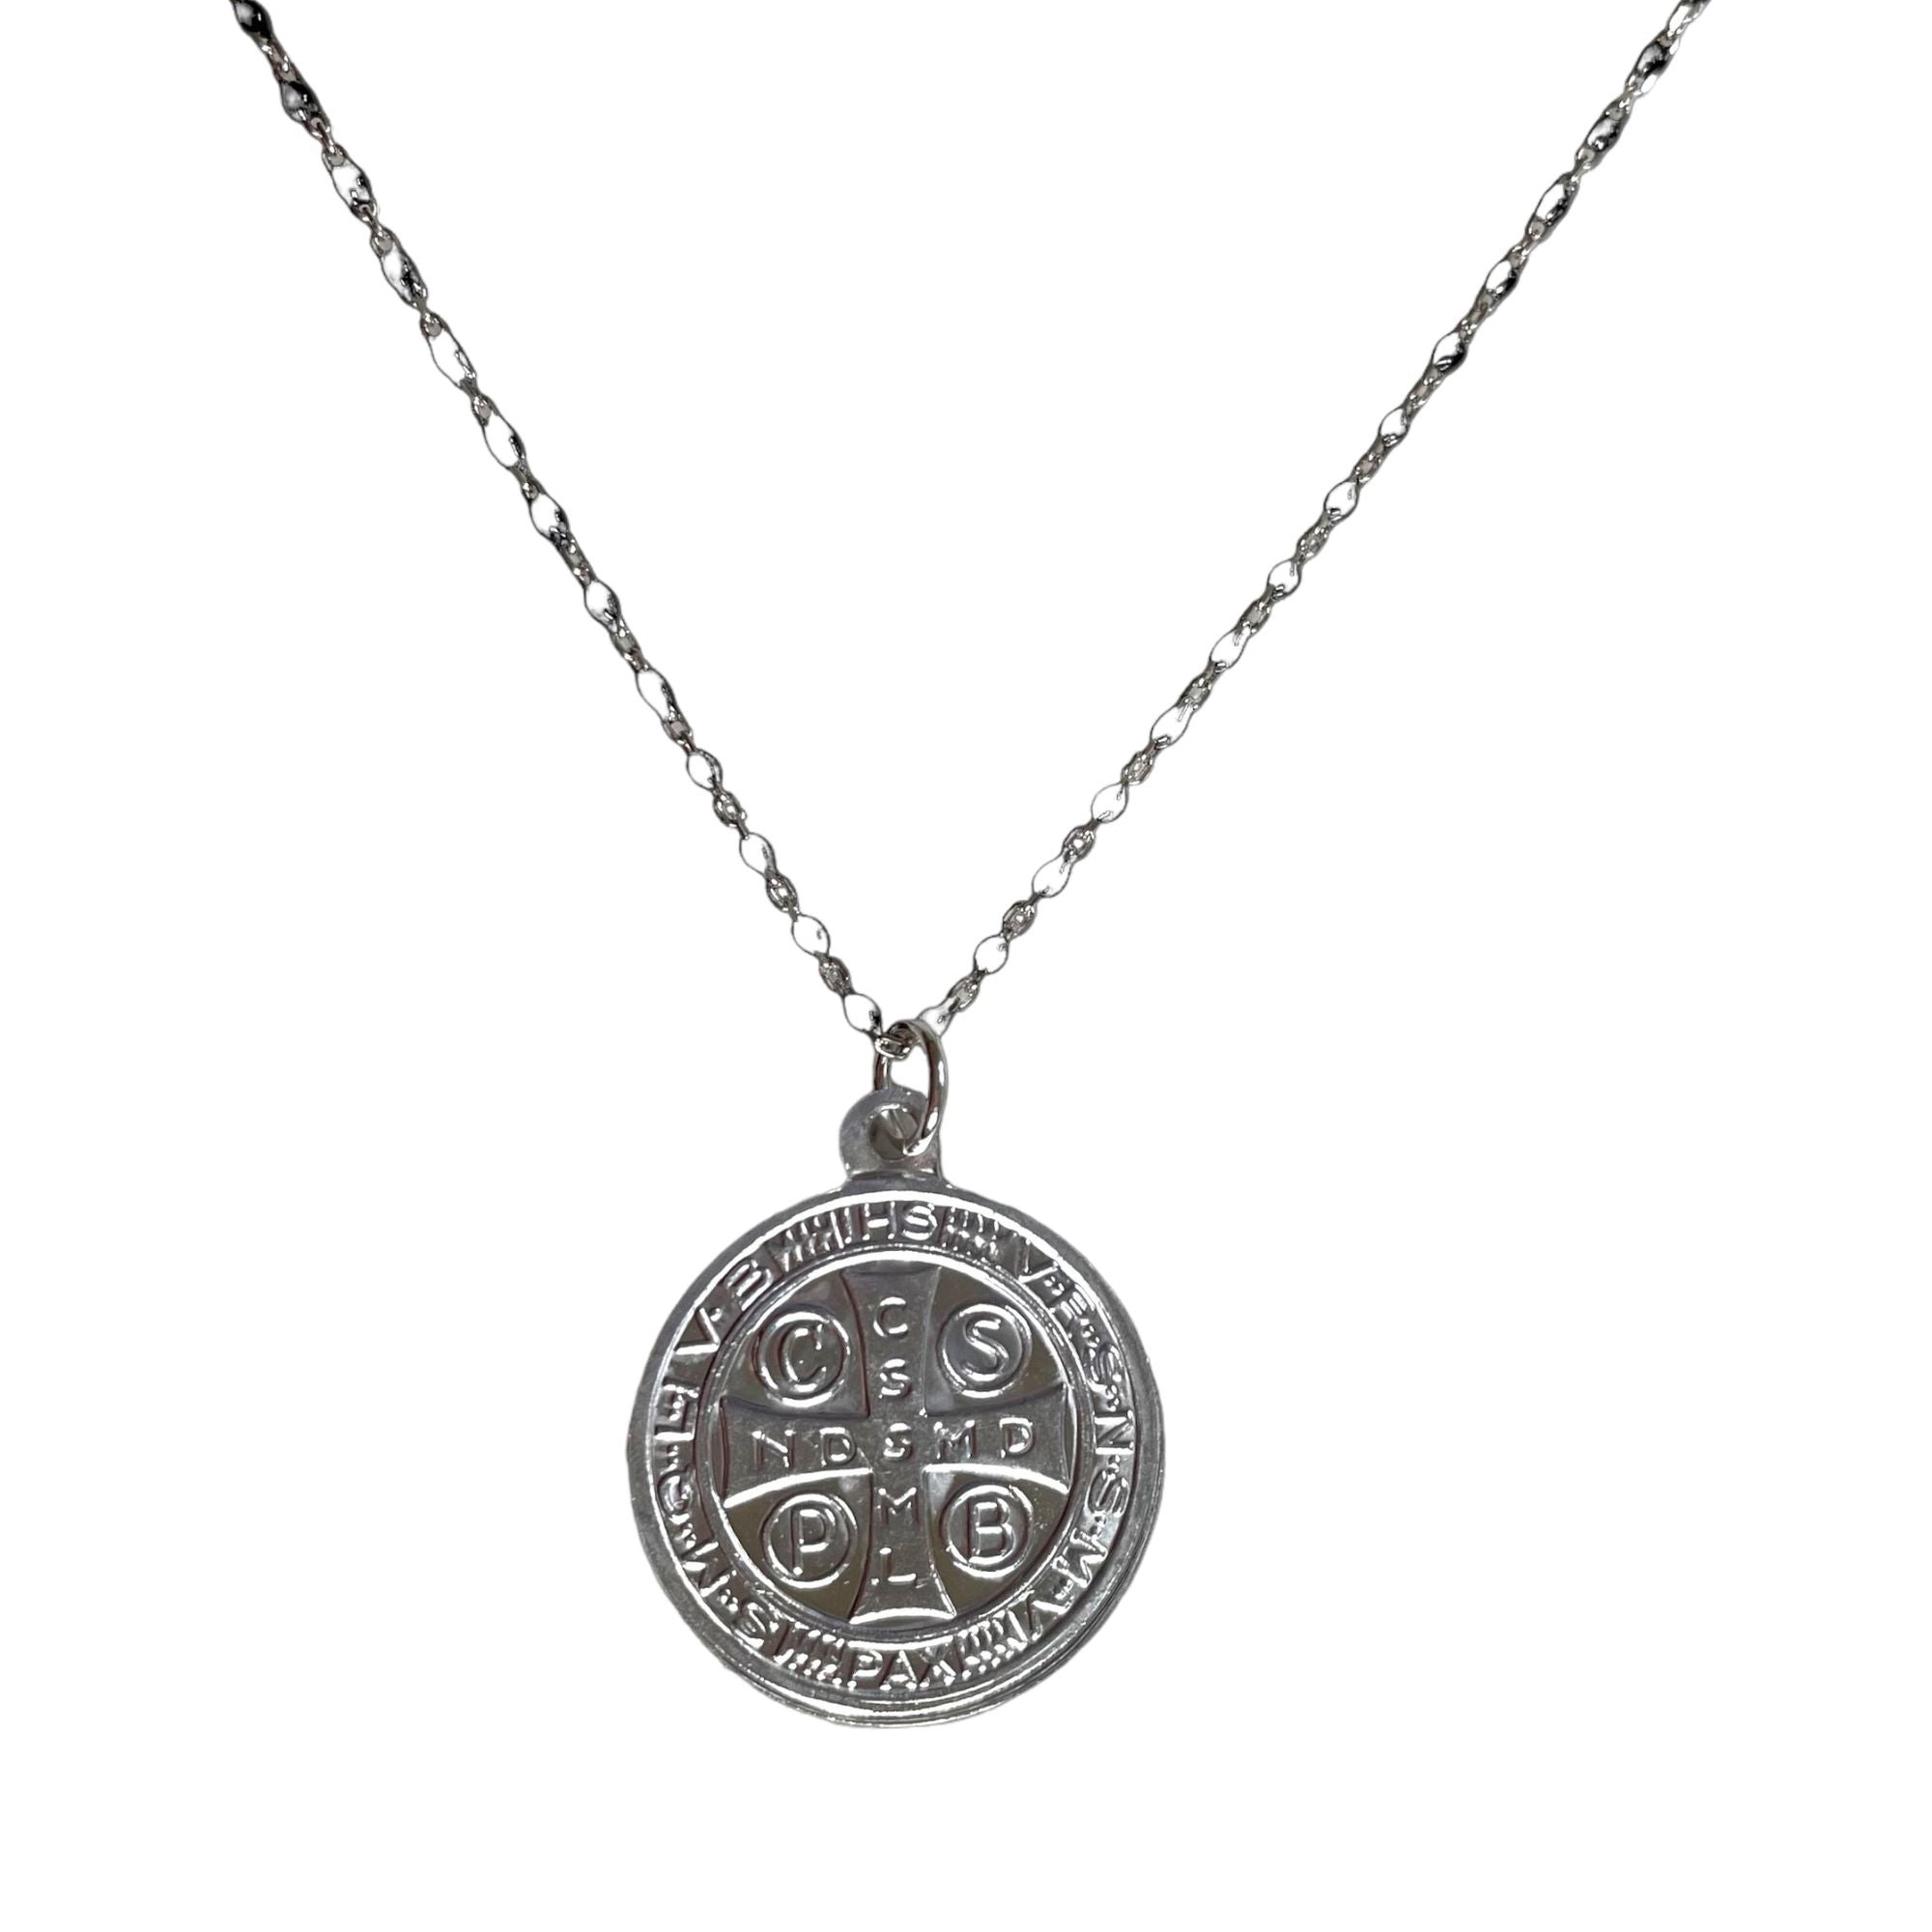 ST. BENEDICT MEDAL ON BLACKIE SILVER 925 NECKLACE Club Palma 